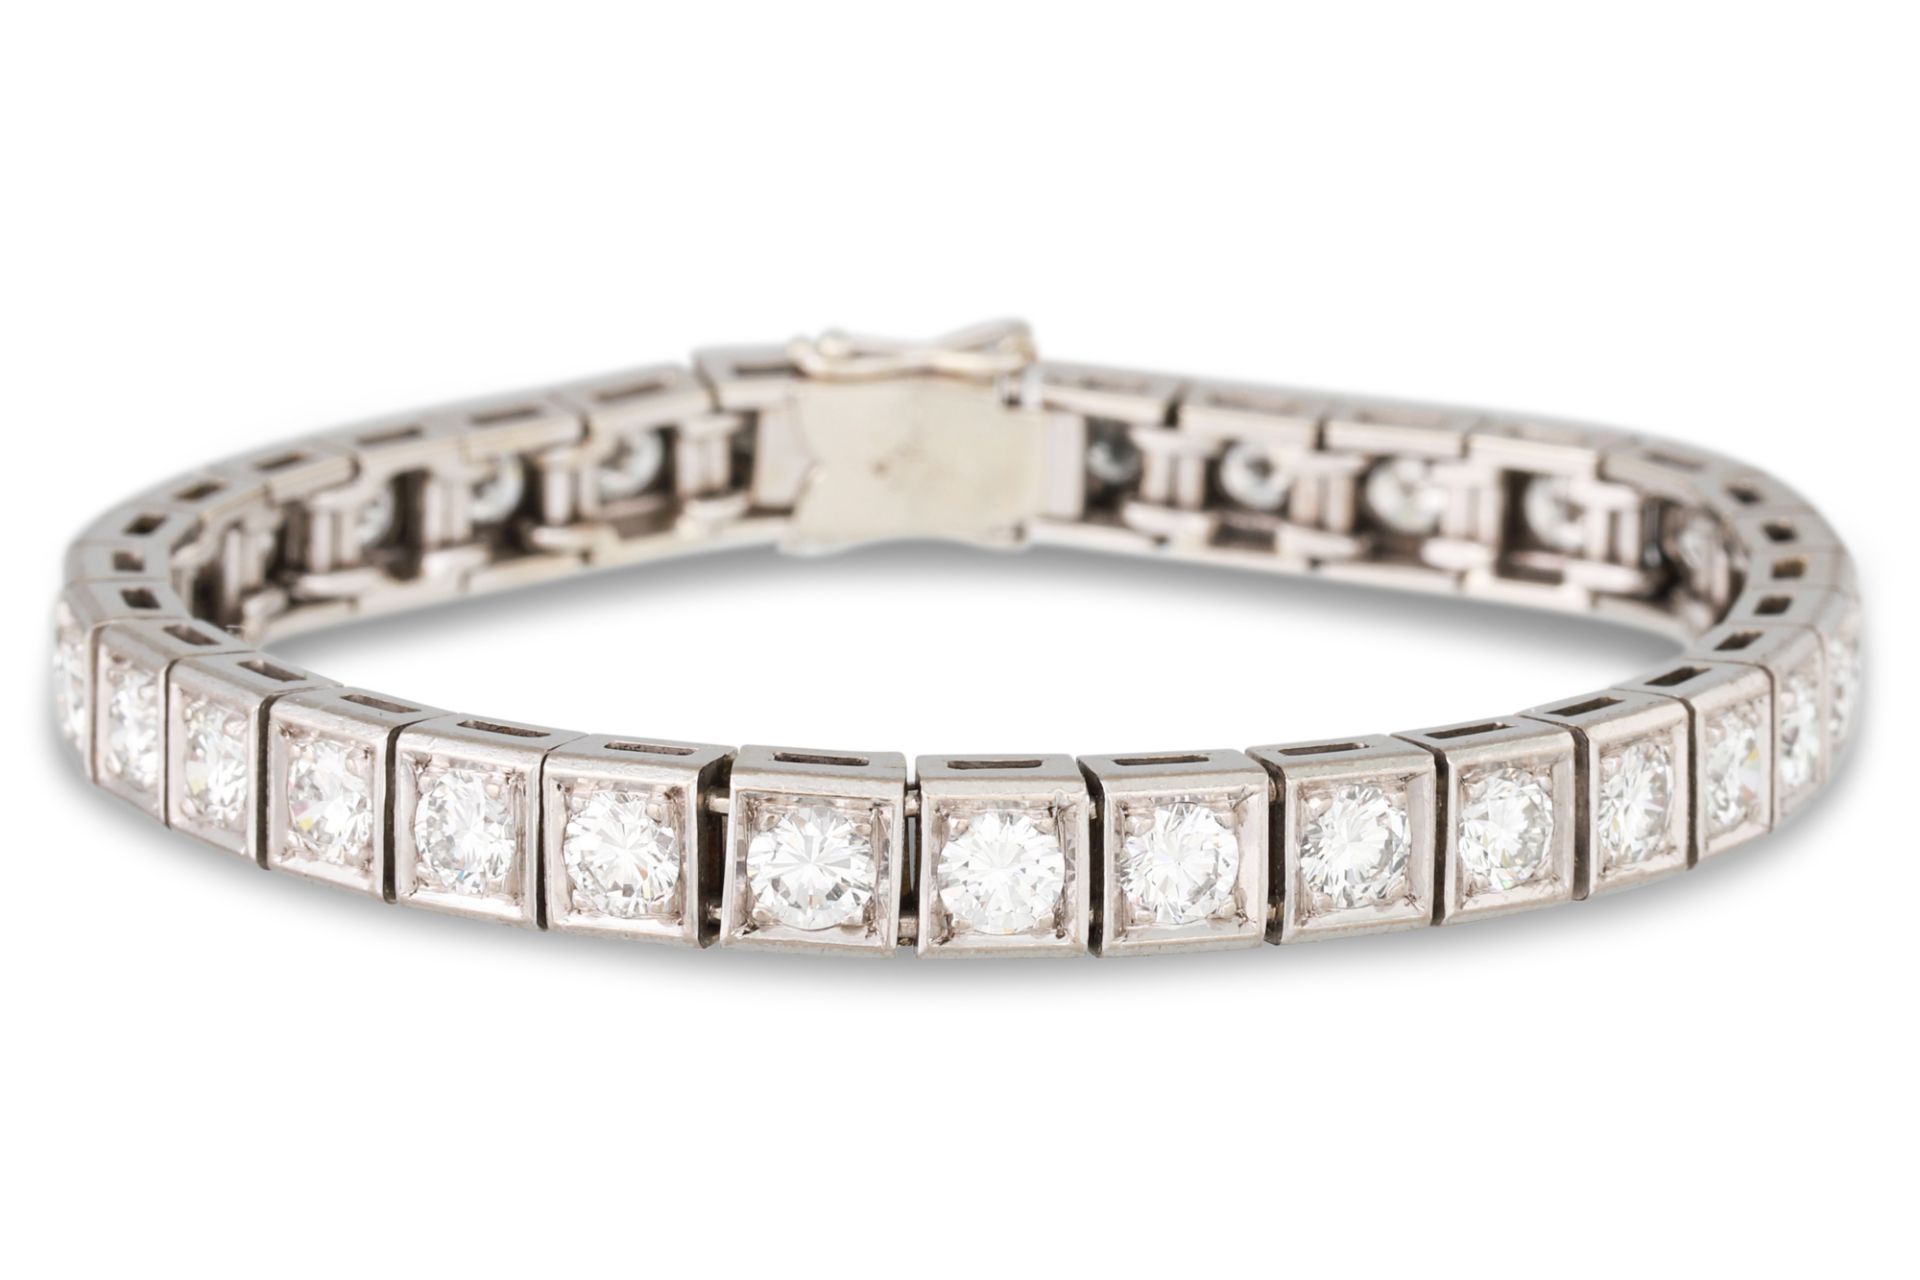 A DIAMOND LINE BRACELET, set with thirty-two round brilliant cut diamonds, mounted in white gold.